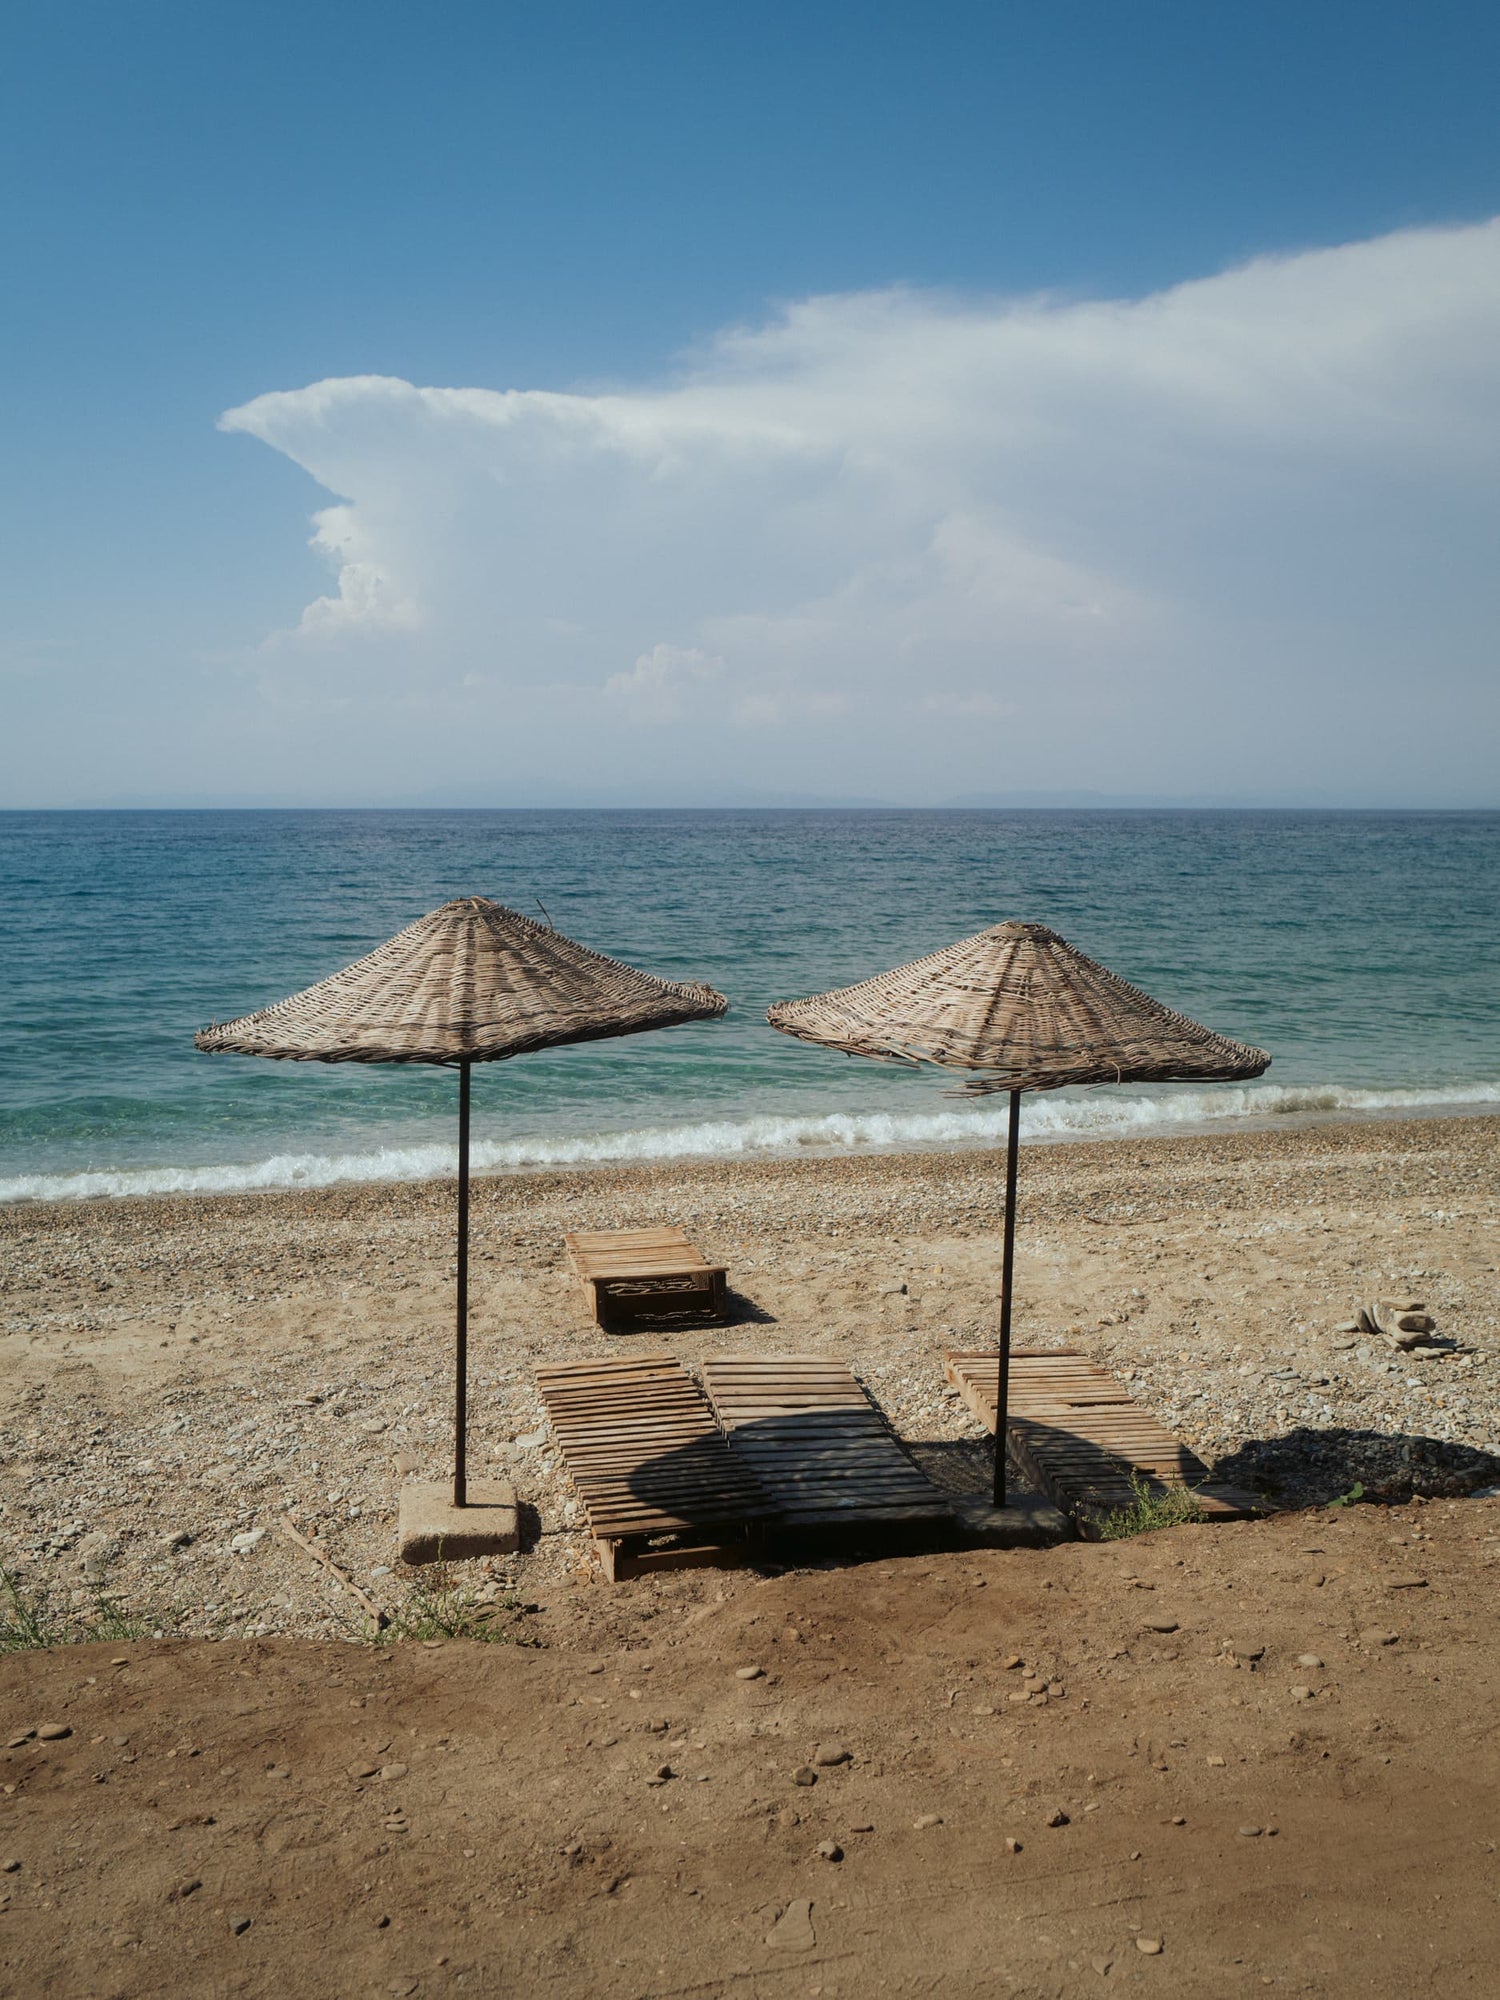 The artpiece 'Deniz' by Mikail Sahin showing two parasols on a tranquil beach next to 2 beachbeds.